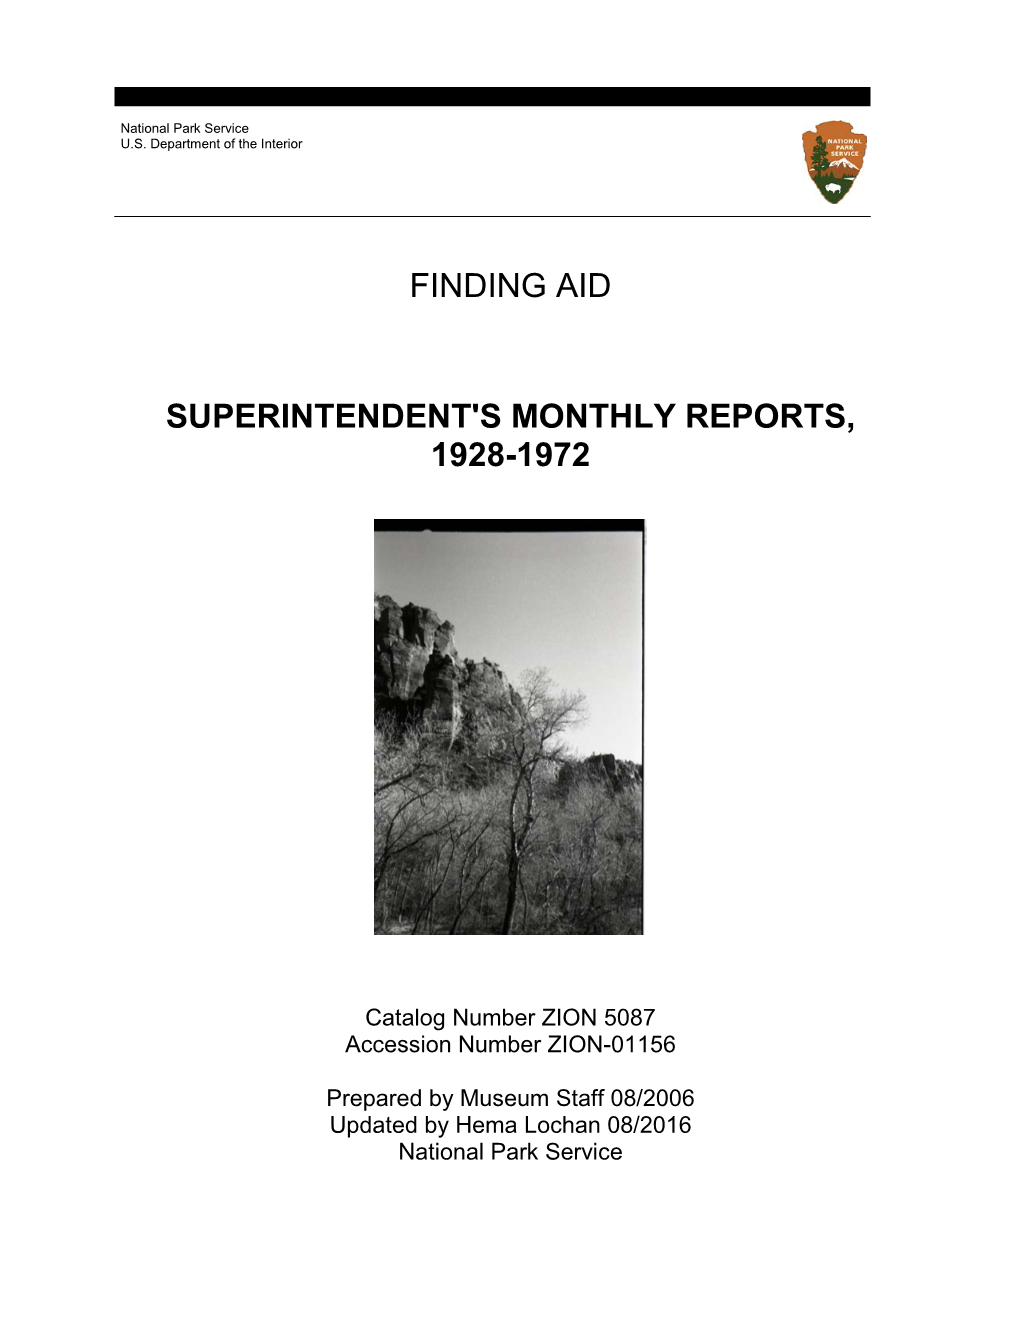 Finding Aid Superintendent's Monthly Reports, 1928-1972